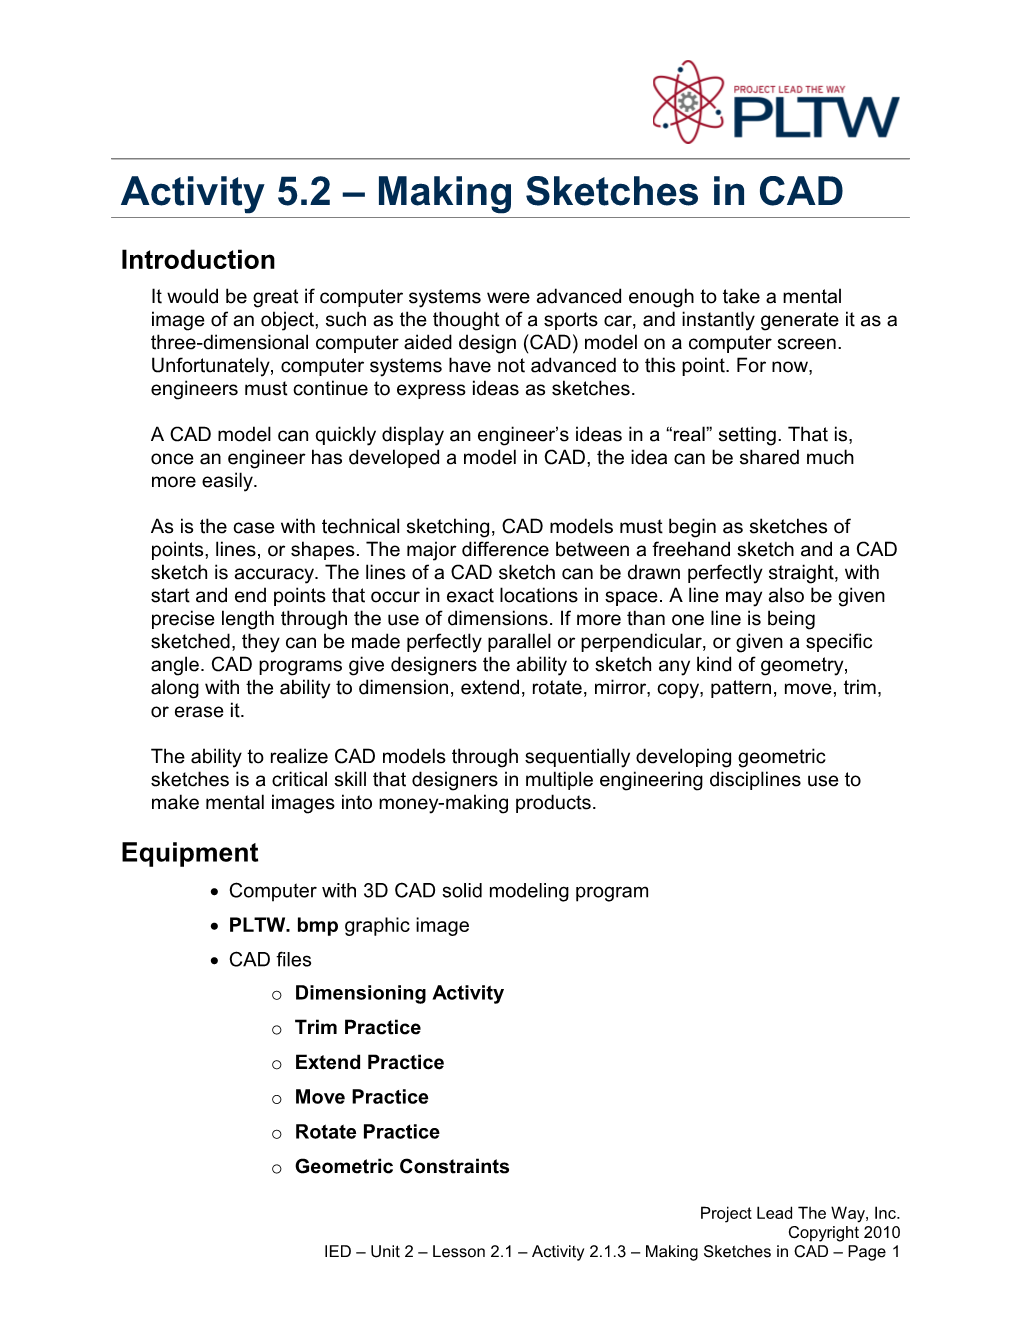 Activity 2.1.3: Making Sketches in CAD